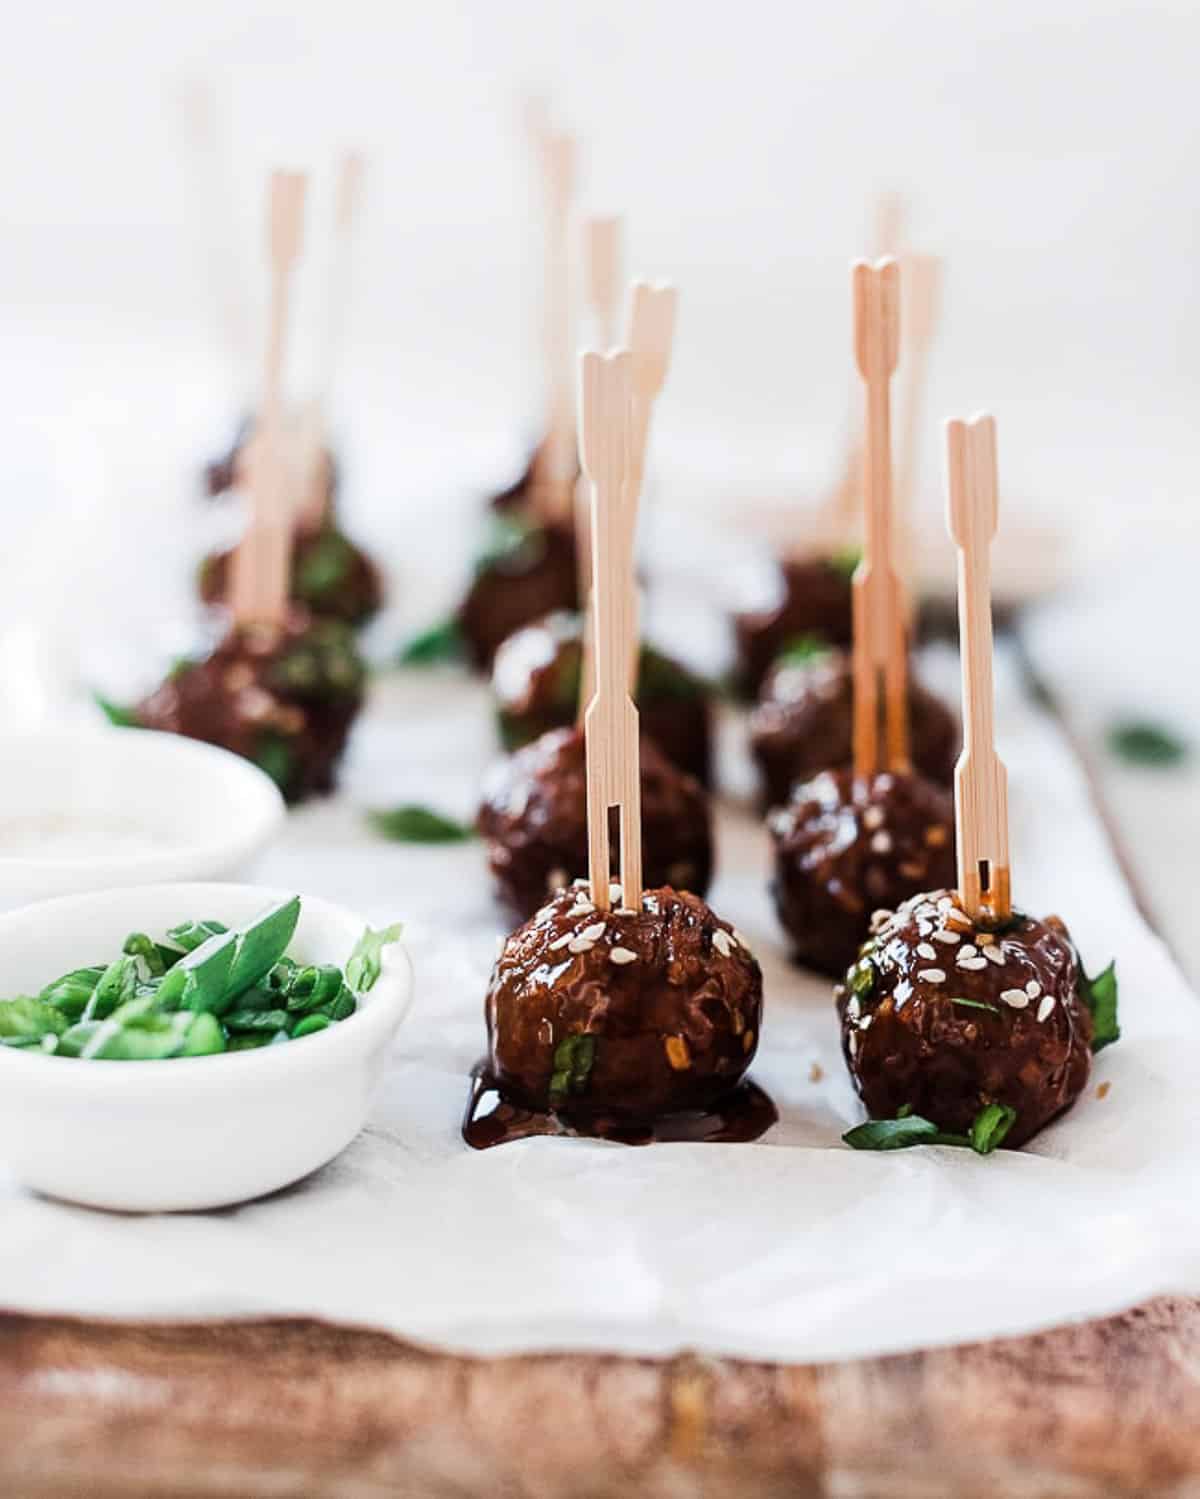 Mongolian meatballs on a wooden tray with wooden skewers inserted.